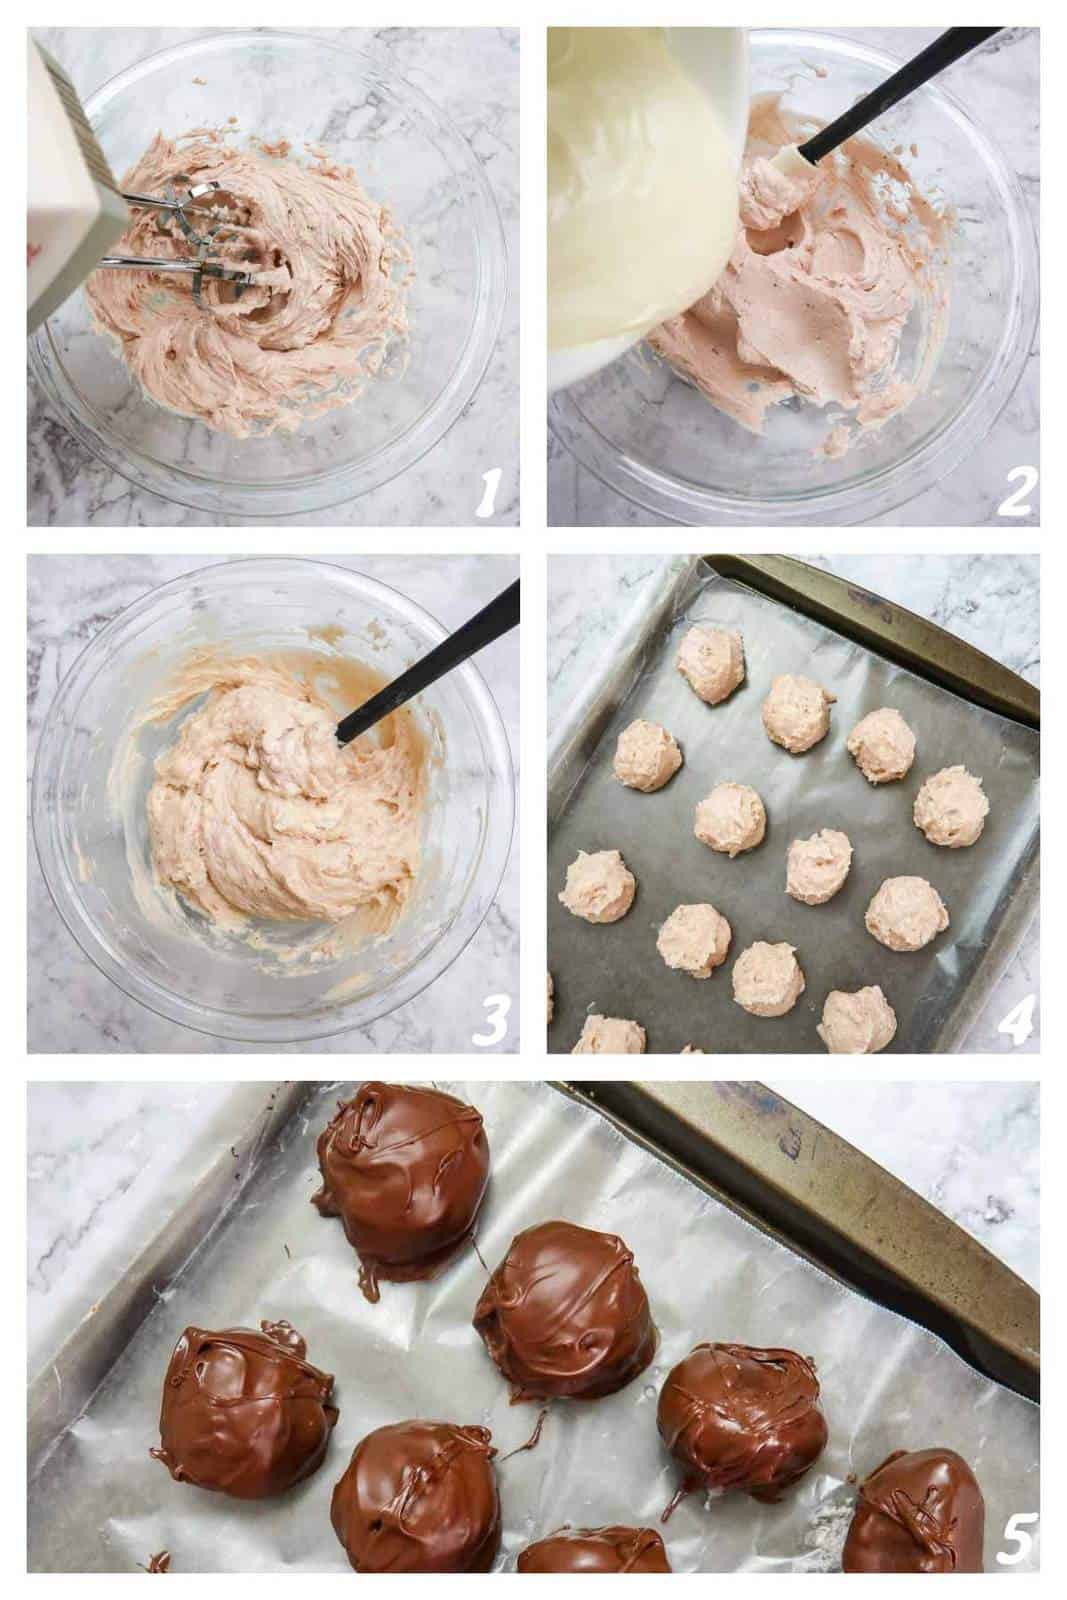 Five panel collage of process shots- combining ingredients, forming truffles, and covering with chocolate.